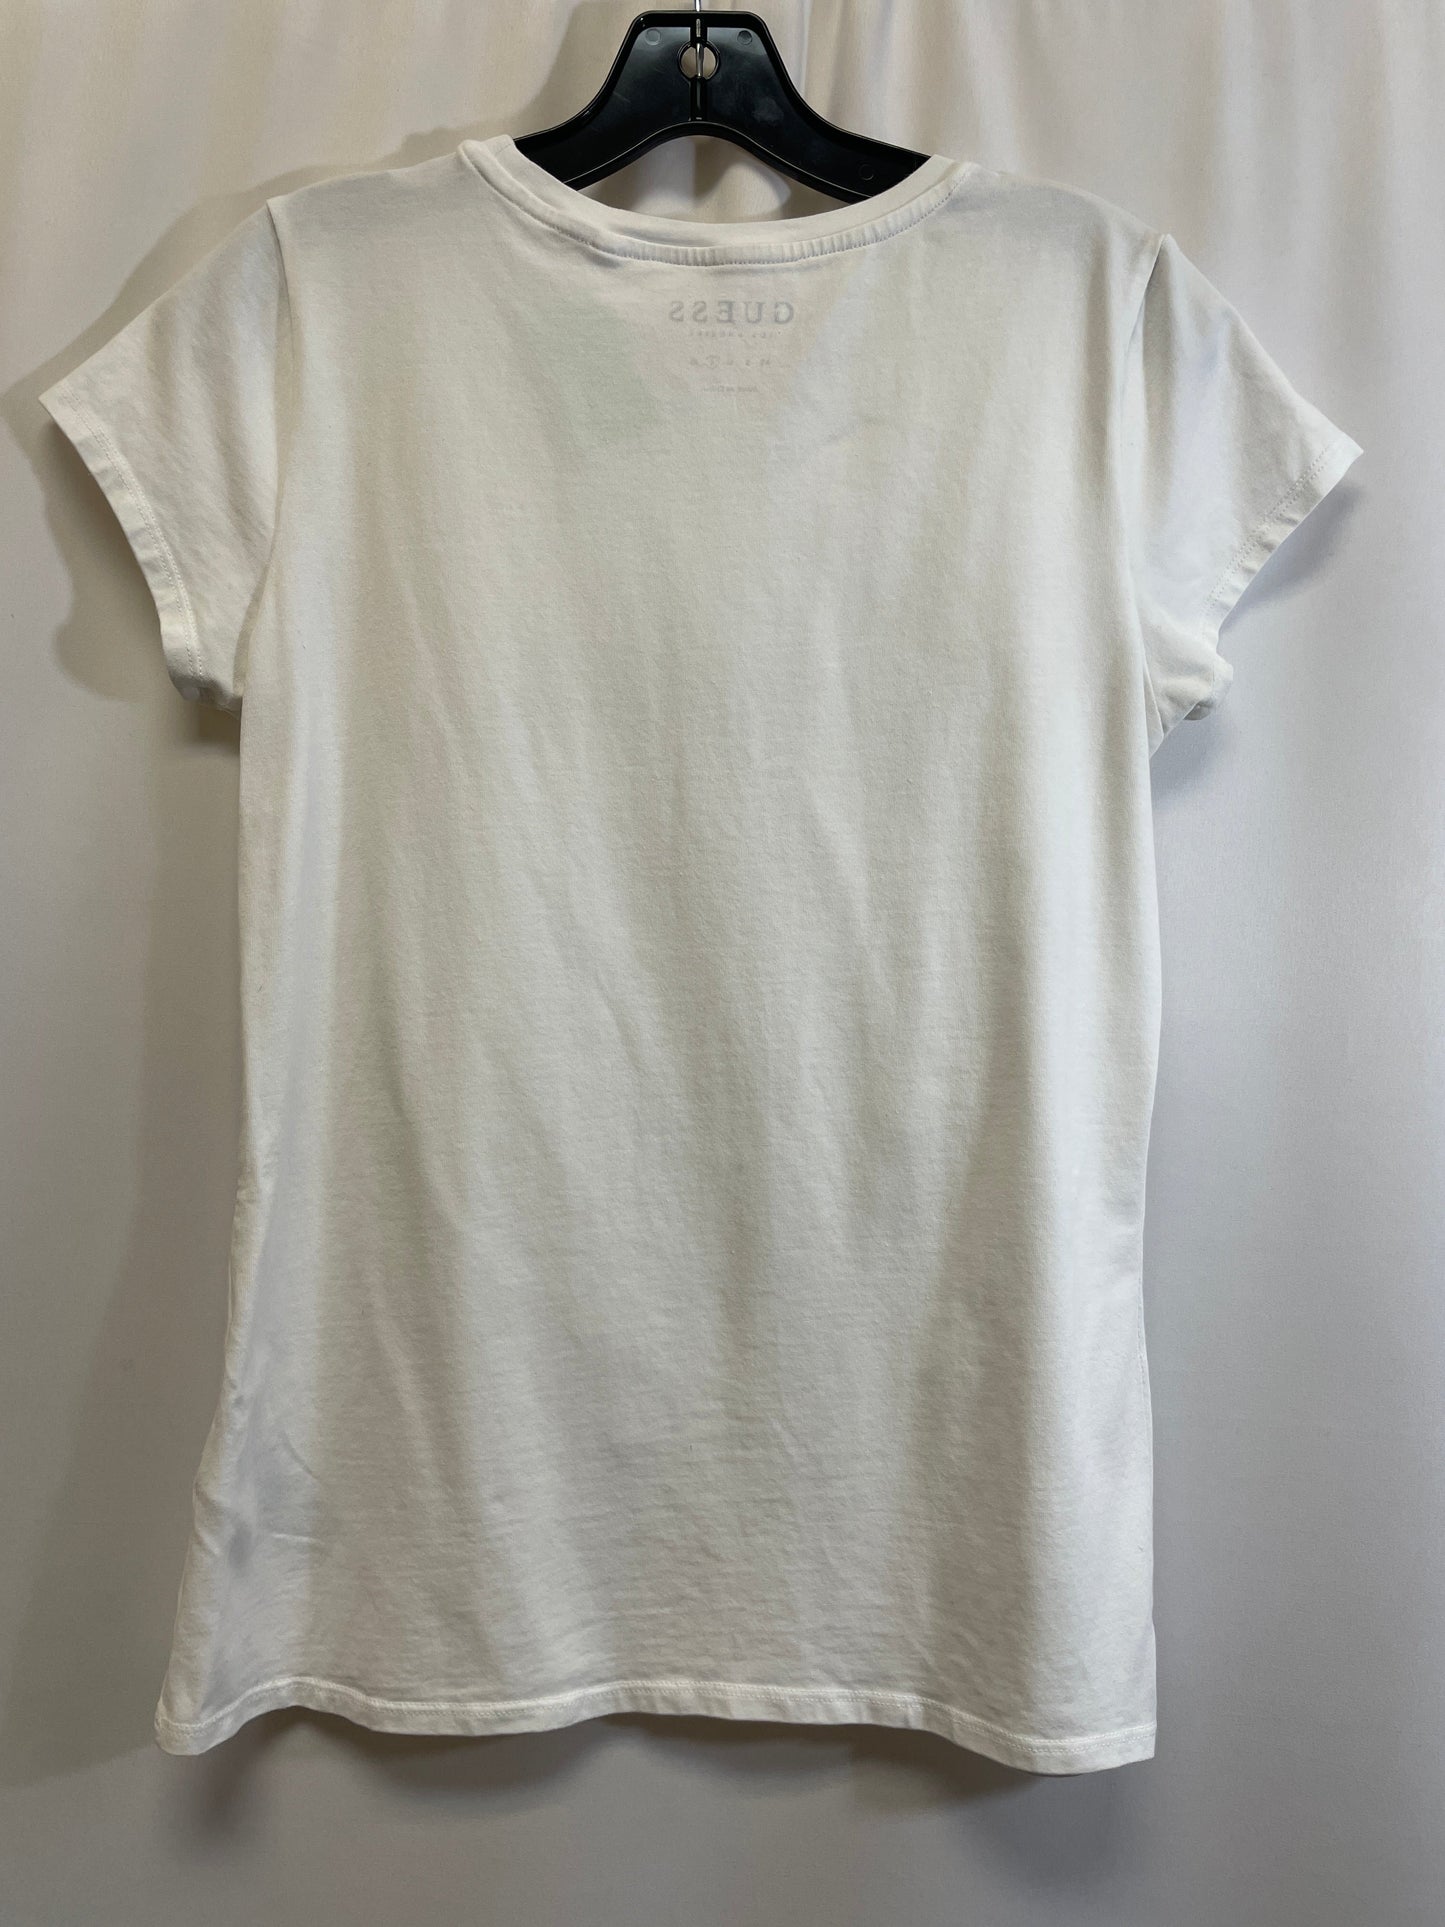 Top Short Sleeve By Guess  Size: L